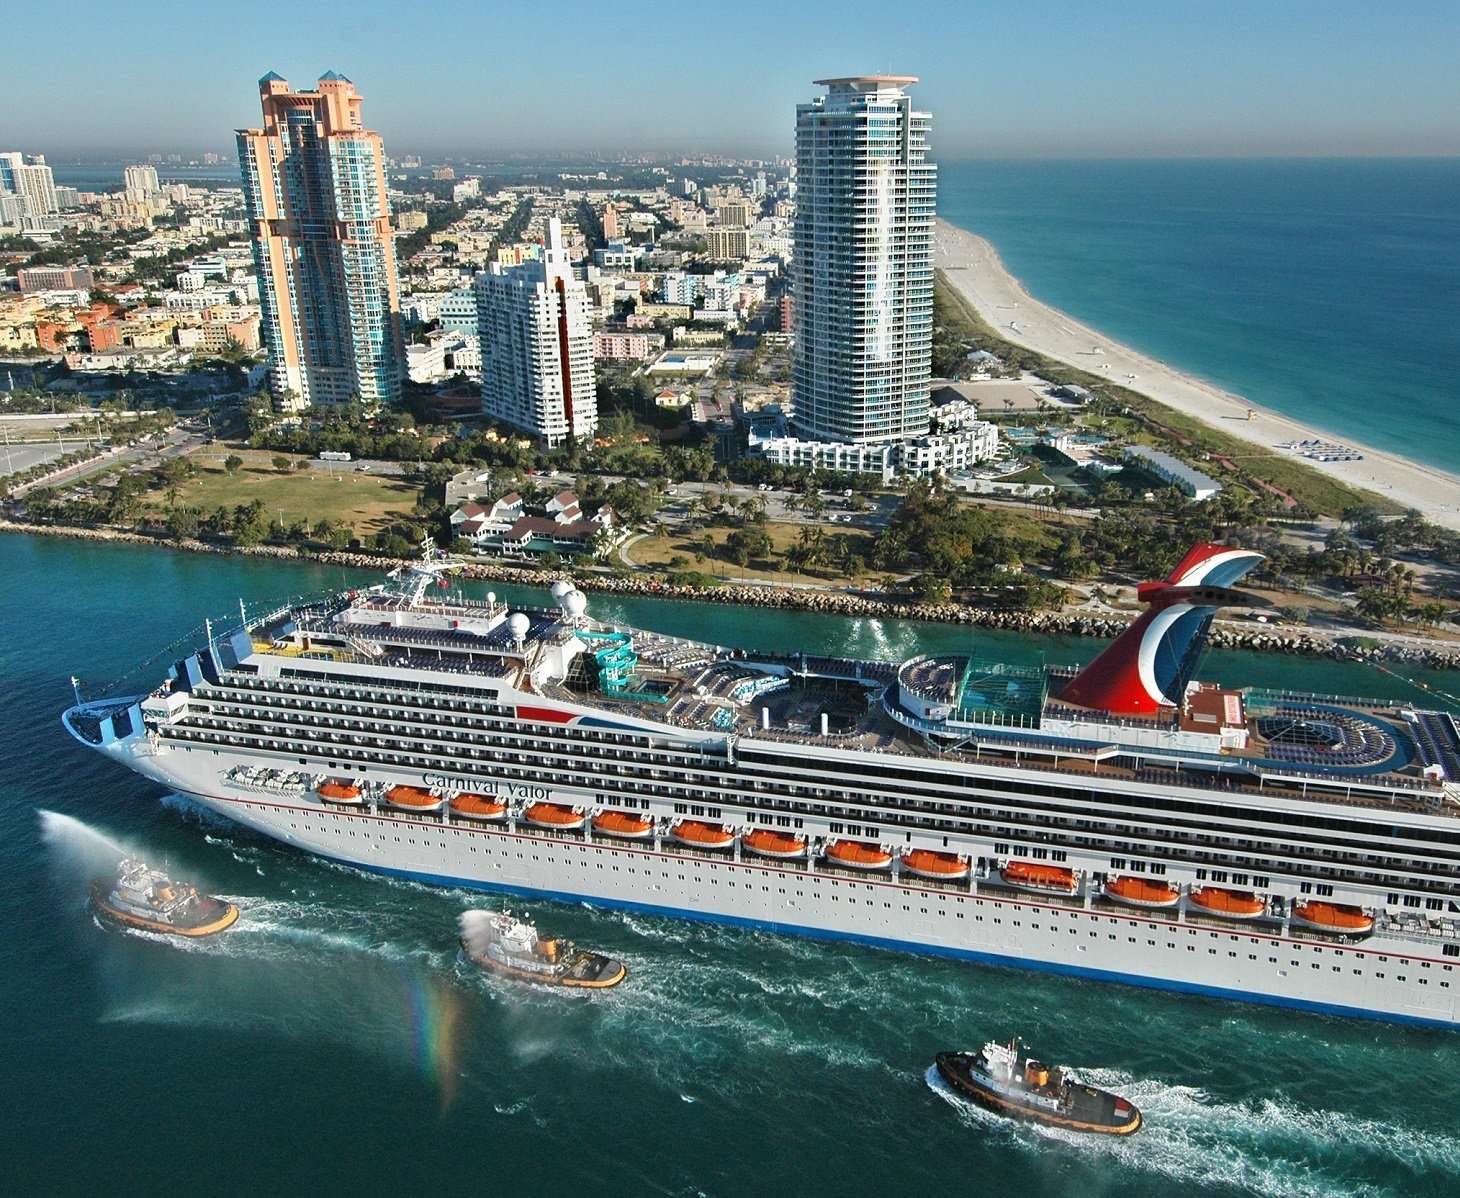 Miami Cruise Port Limo Transfers from $89.00*